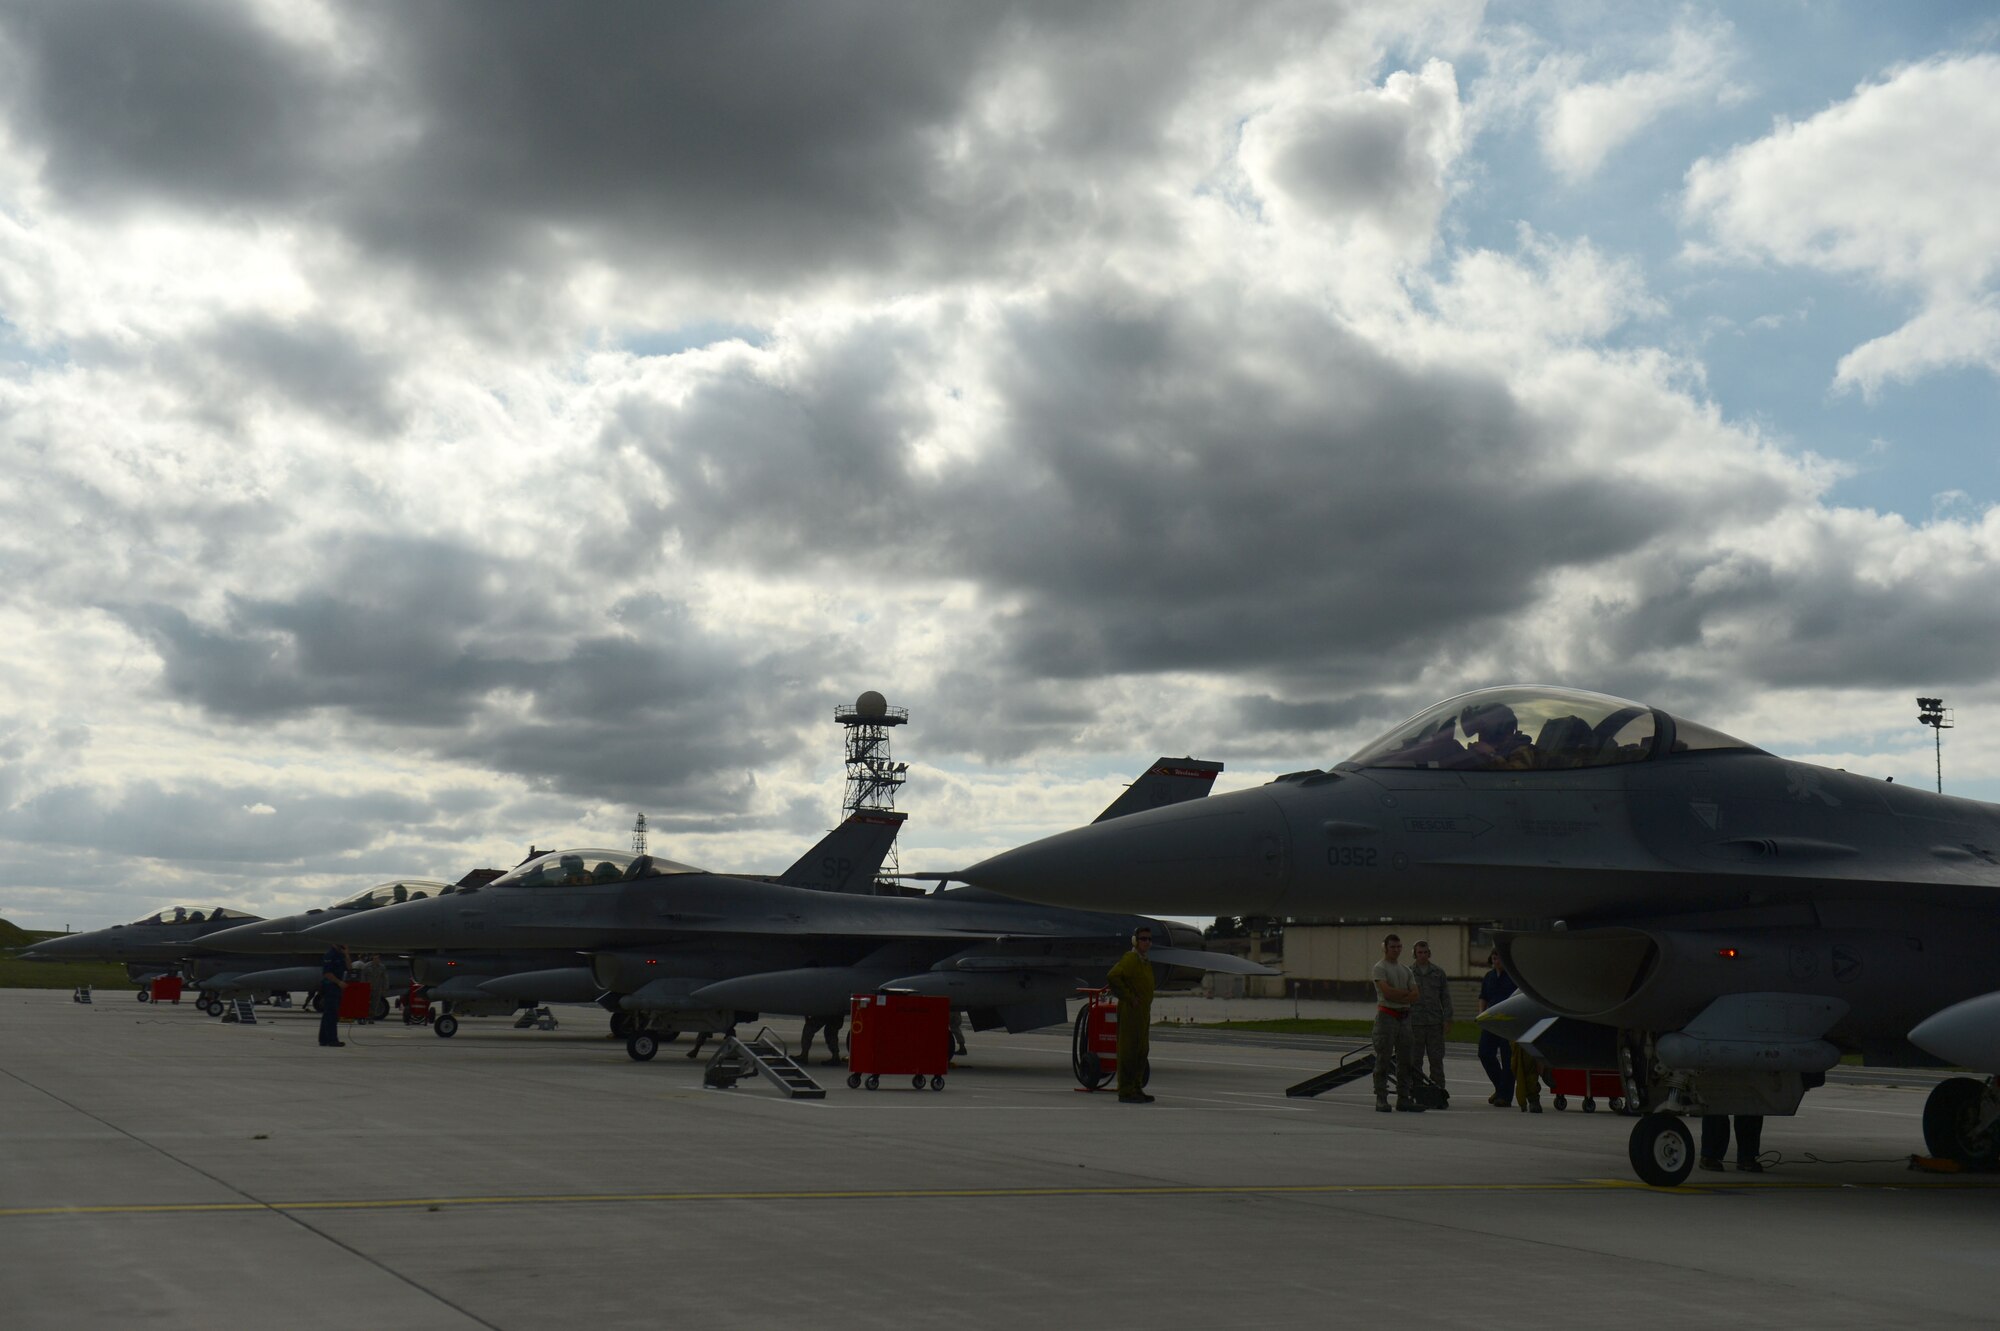 SPANGDAHLEM AIR BASE, Germany – A group of F-16 Fighting Falcon fighter aircraft sit on the flightline during a deployment homecoming Sept. 15, 2013. The 480th FS Airmen and aircraft deployed in support of Operation Enduring Freedom. (U.S. Air Force photo by Airman 1st Class Gustavo Castillo/Released)